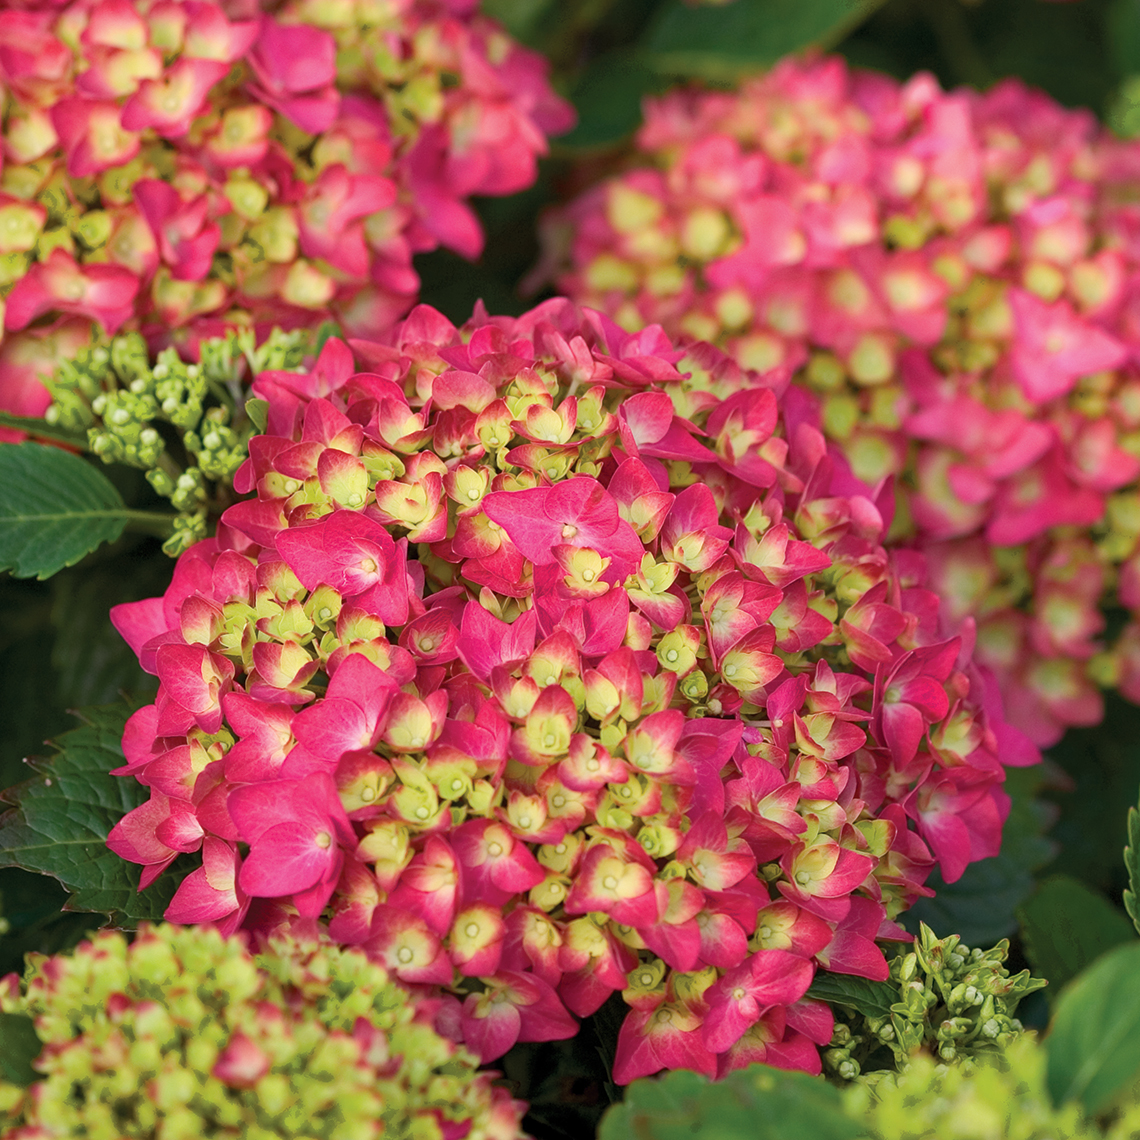 The bright pink mophead blooms of Pink Shira hydrangea are yellow green in the center